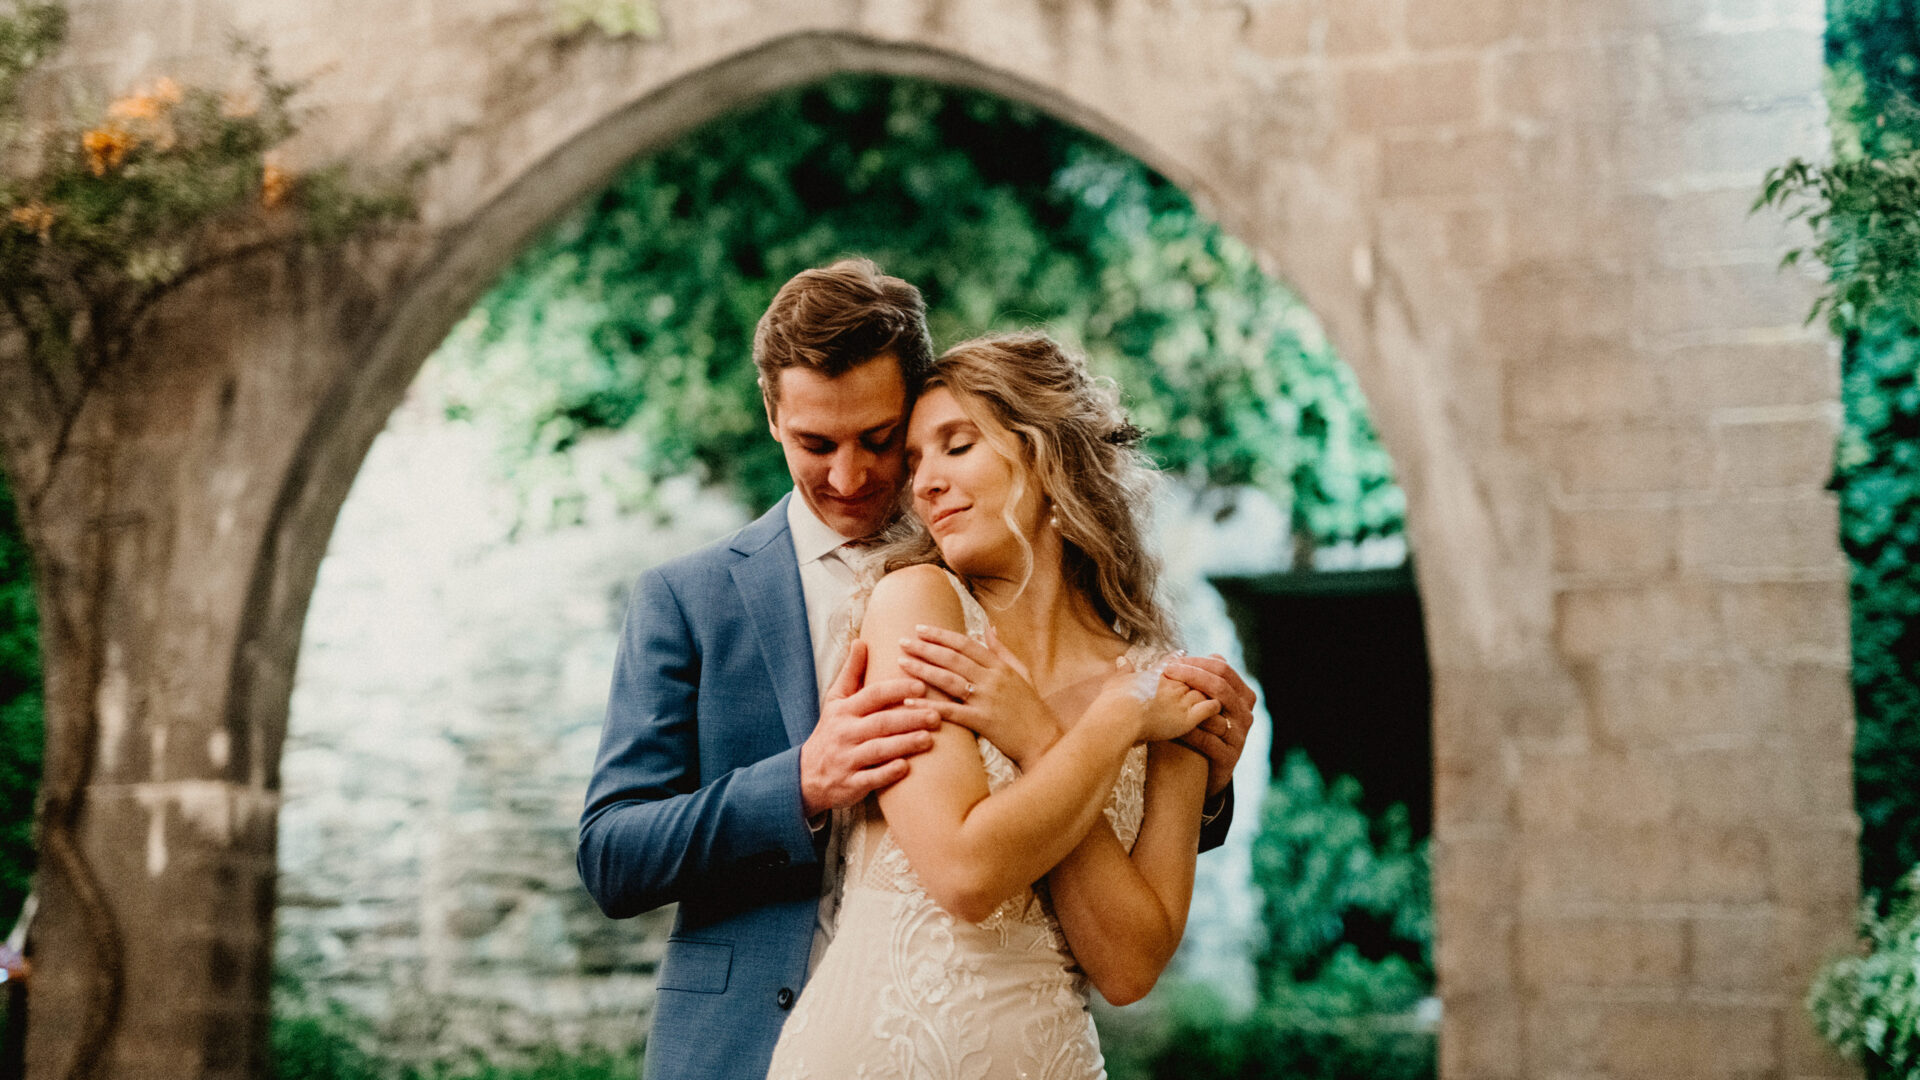 Groom embracing bride from behind with a stone archway in the background